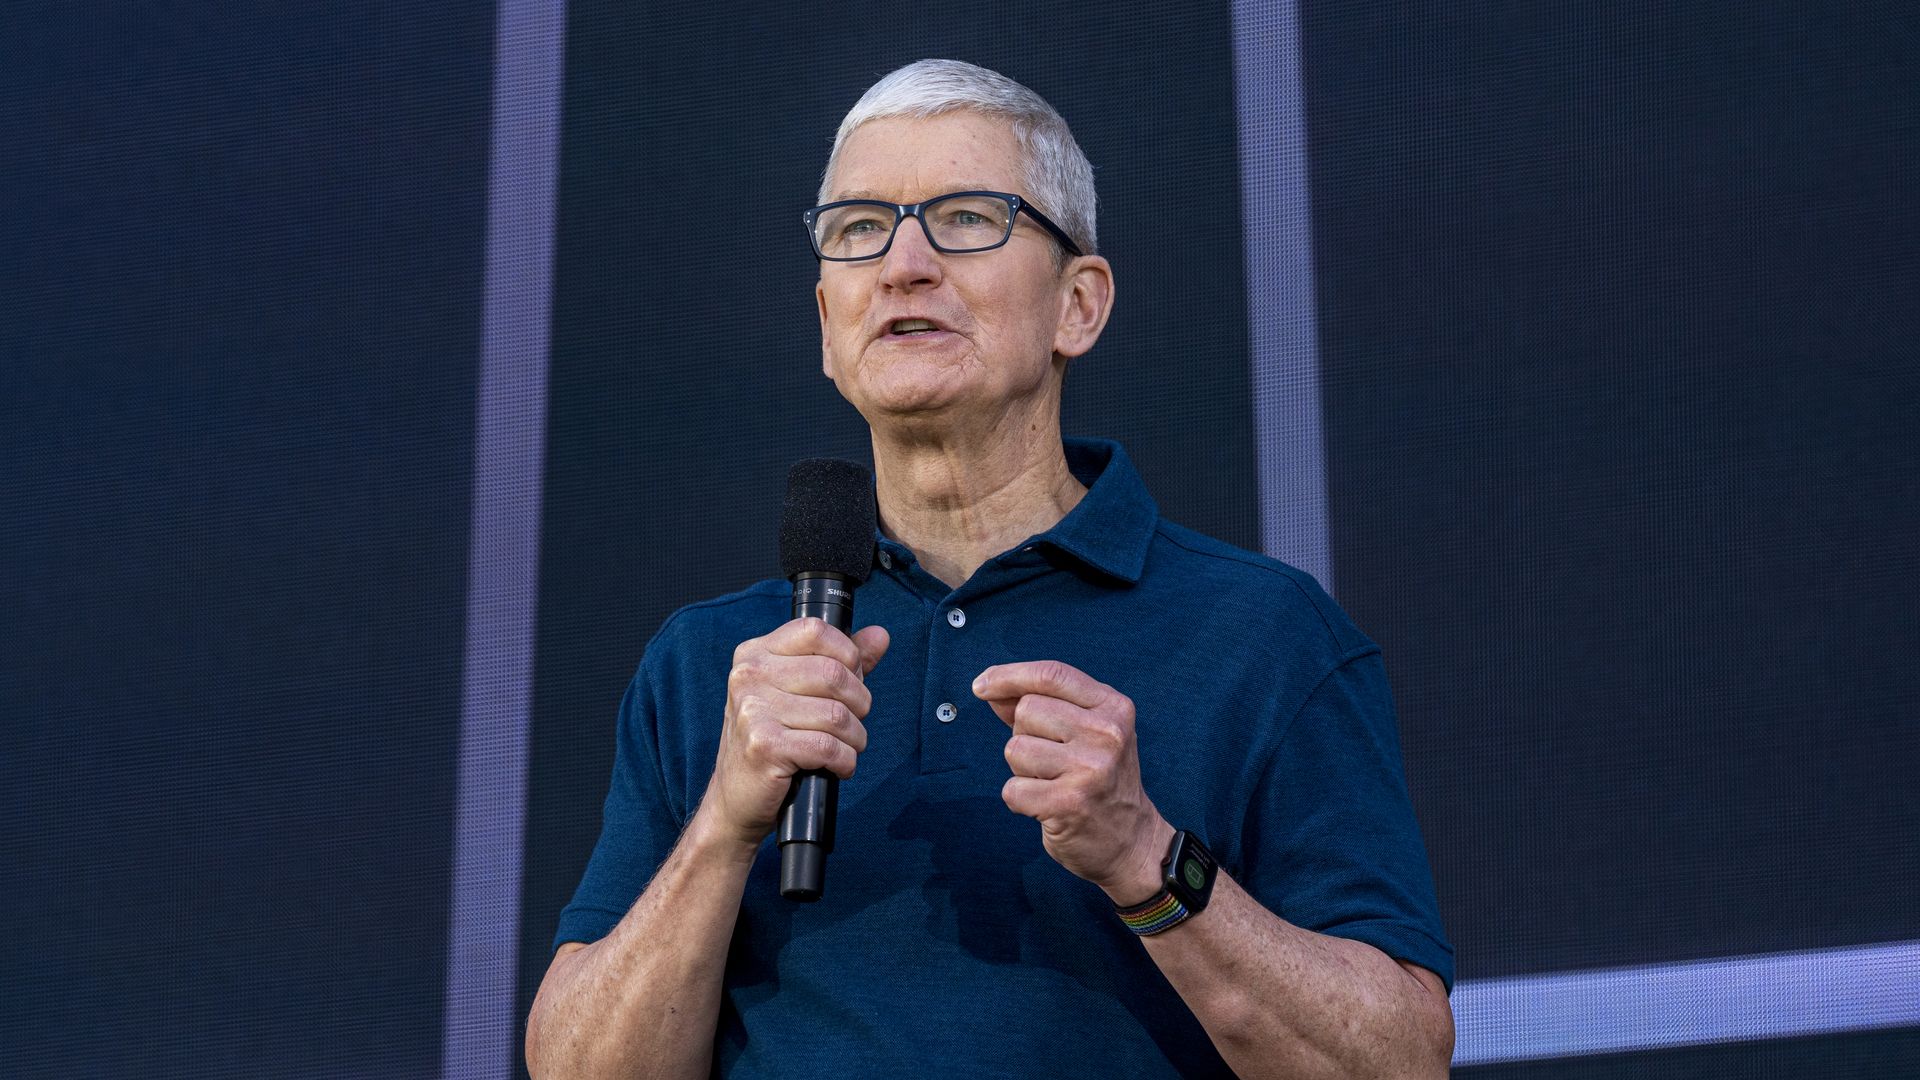 Apple CEO Tim Cook, speaking at WWDC 2022